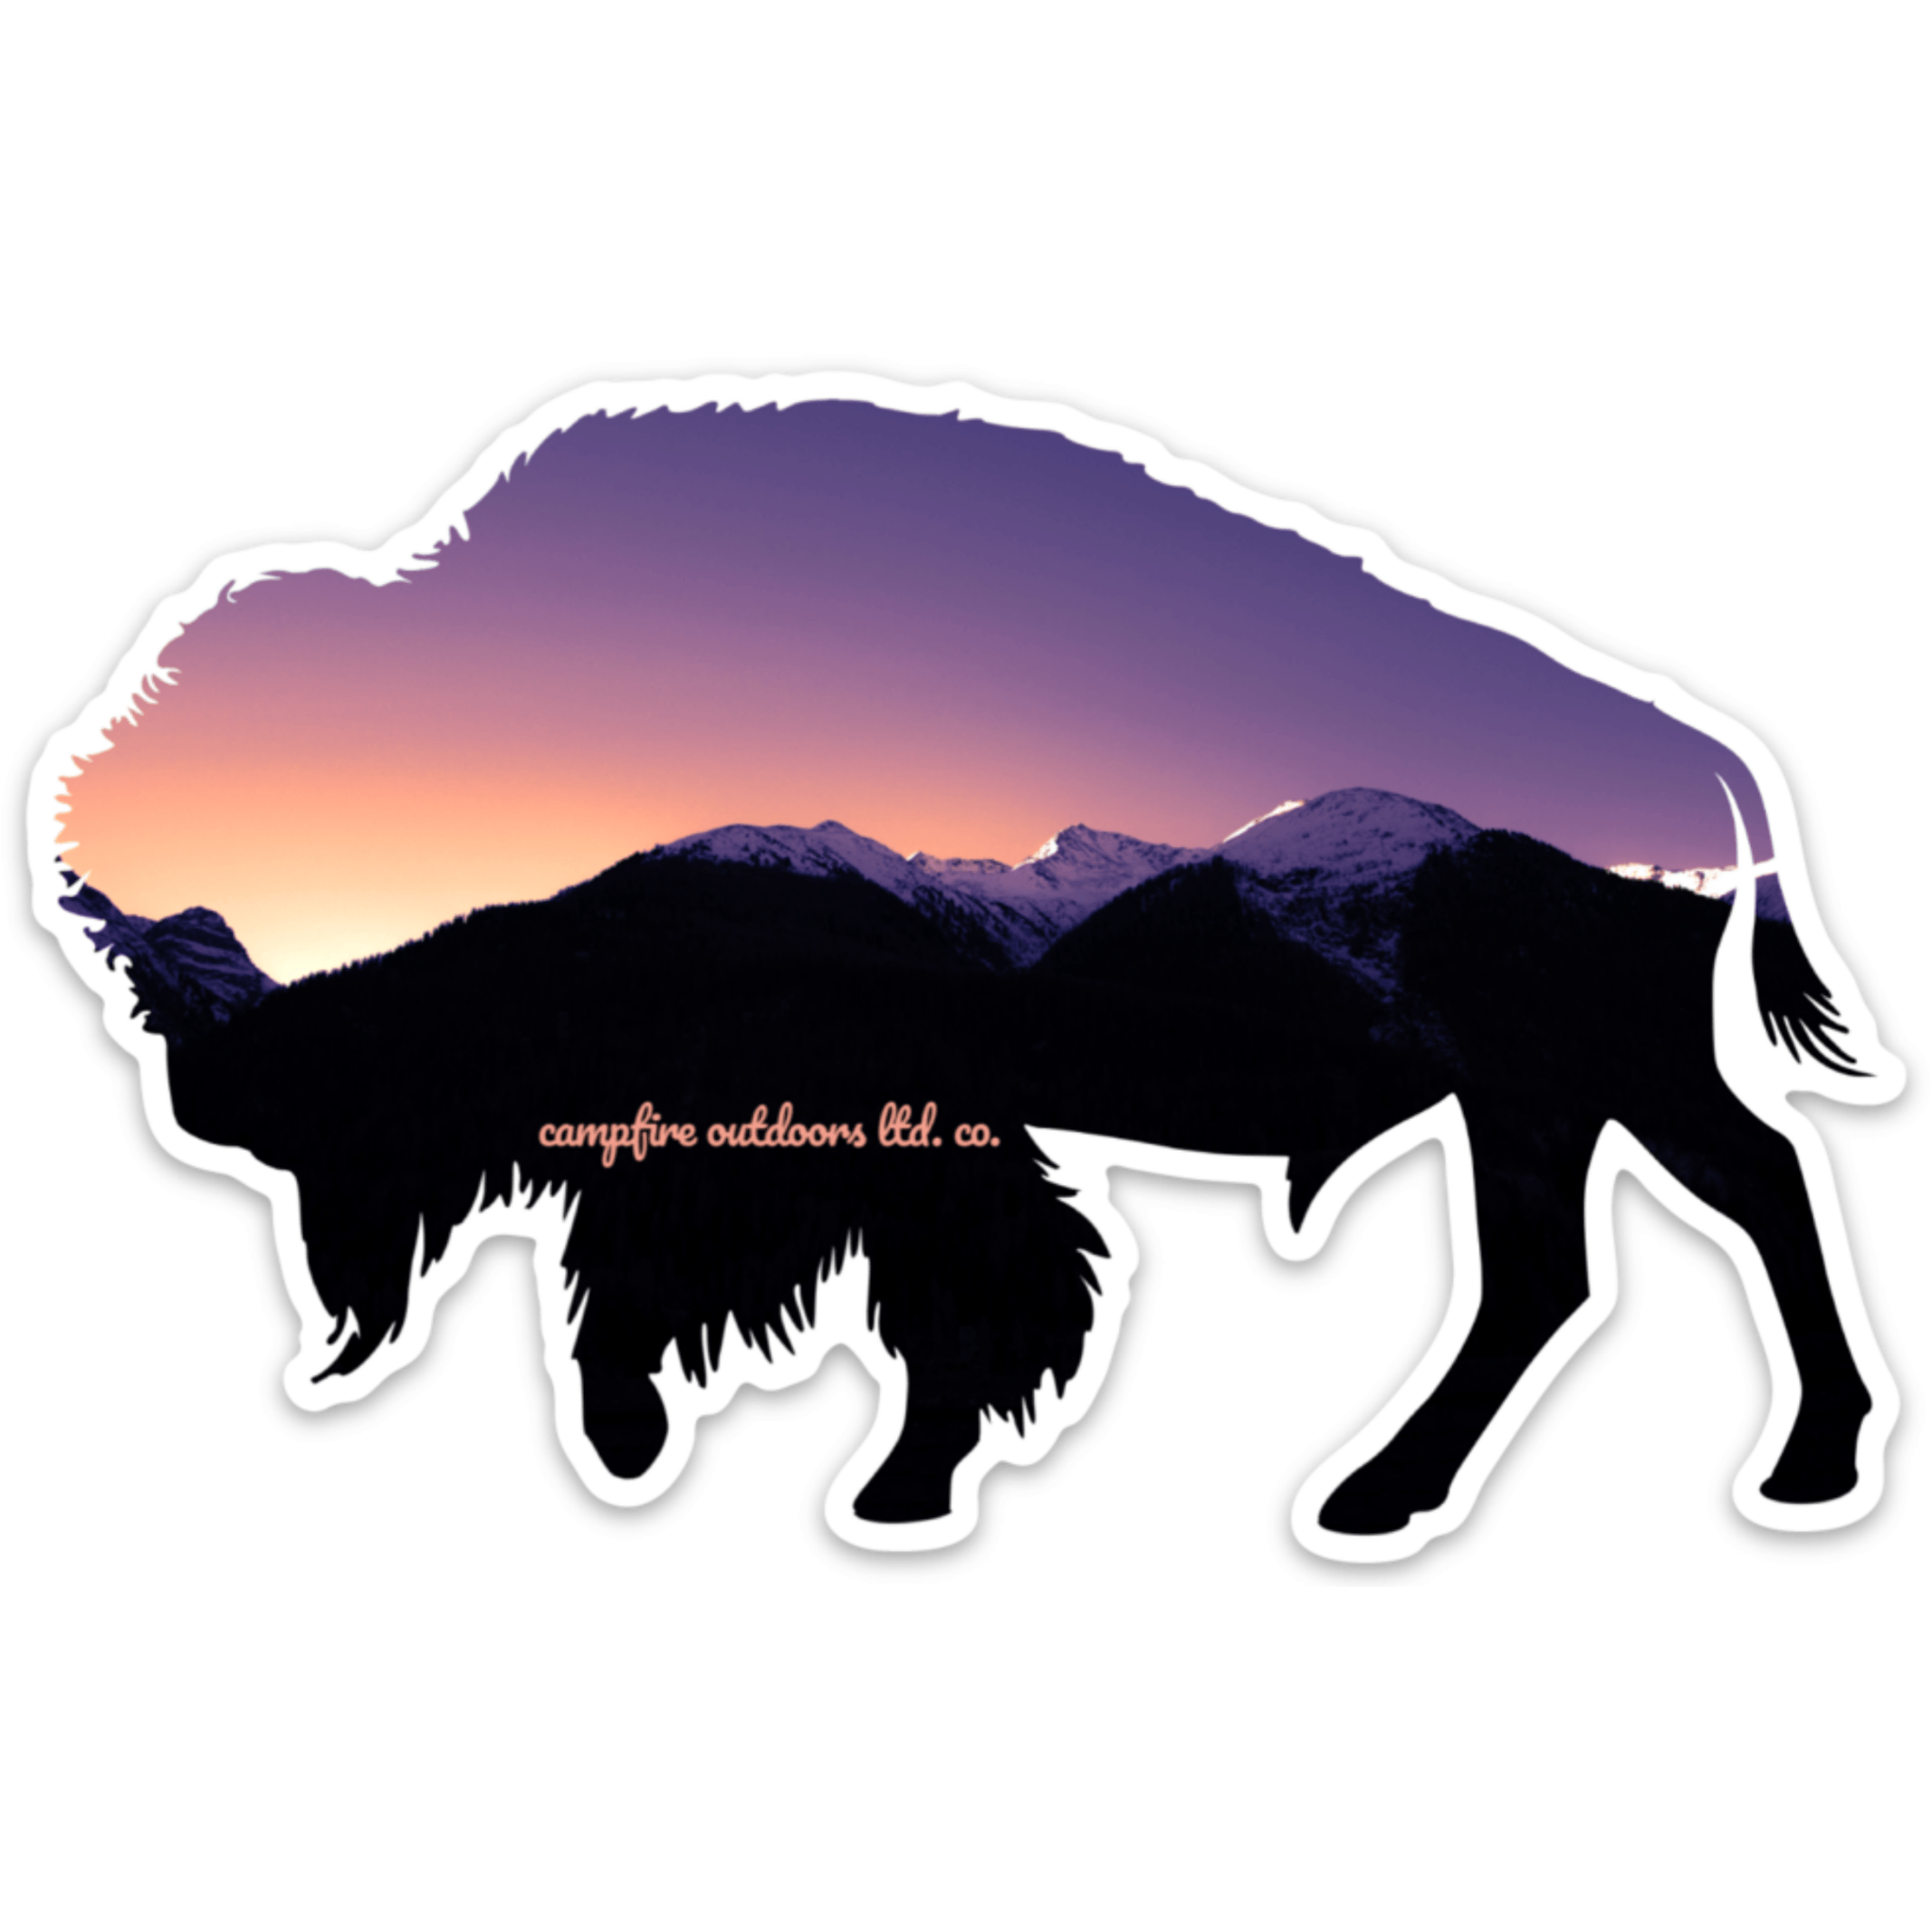 Sunset Bison Logo - Sunset Bison (5 in. x 3.17 in.) - Campfire Outdoors Ltd. Co.